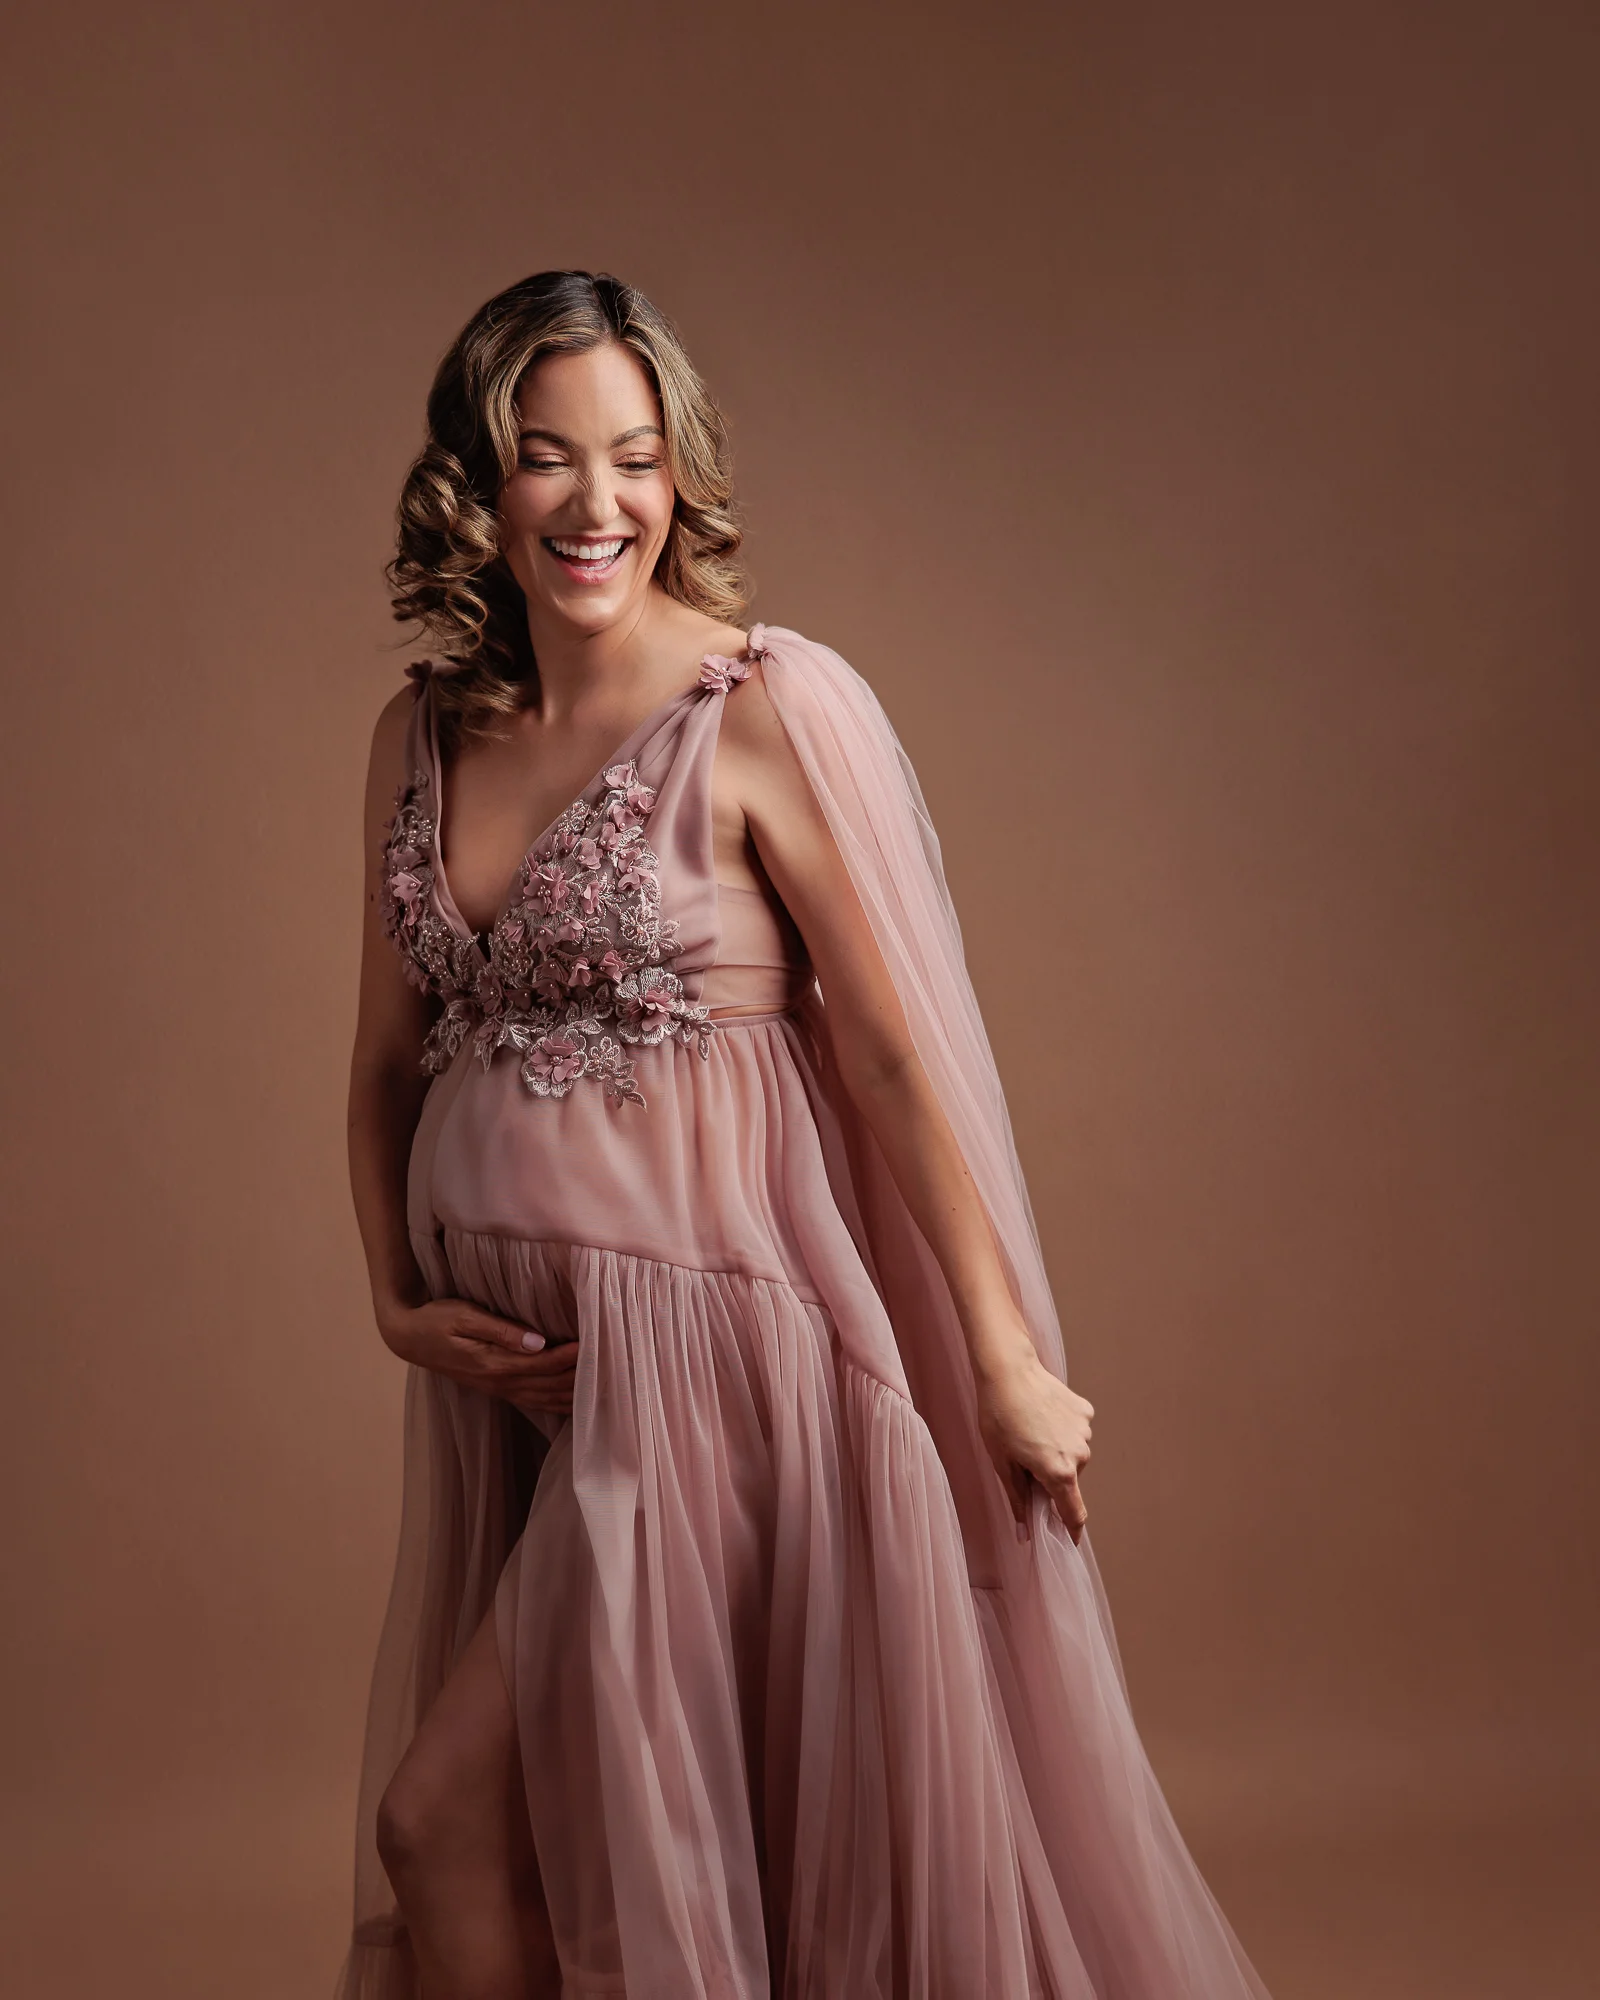 Pregnant woman laughing at her maternity photography